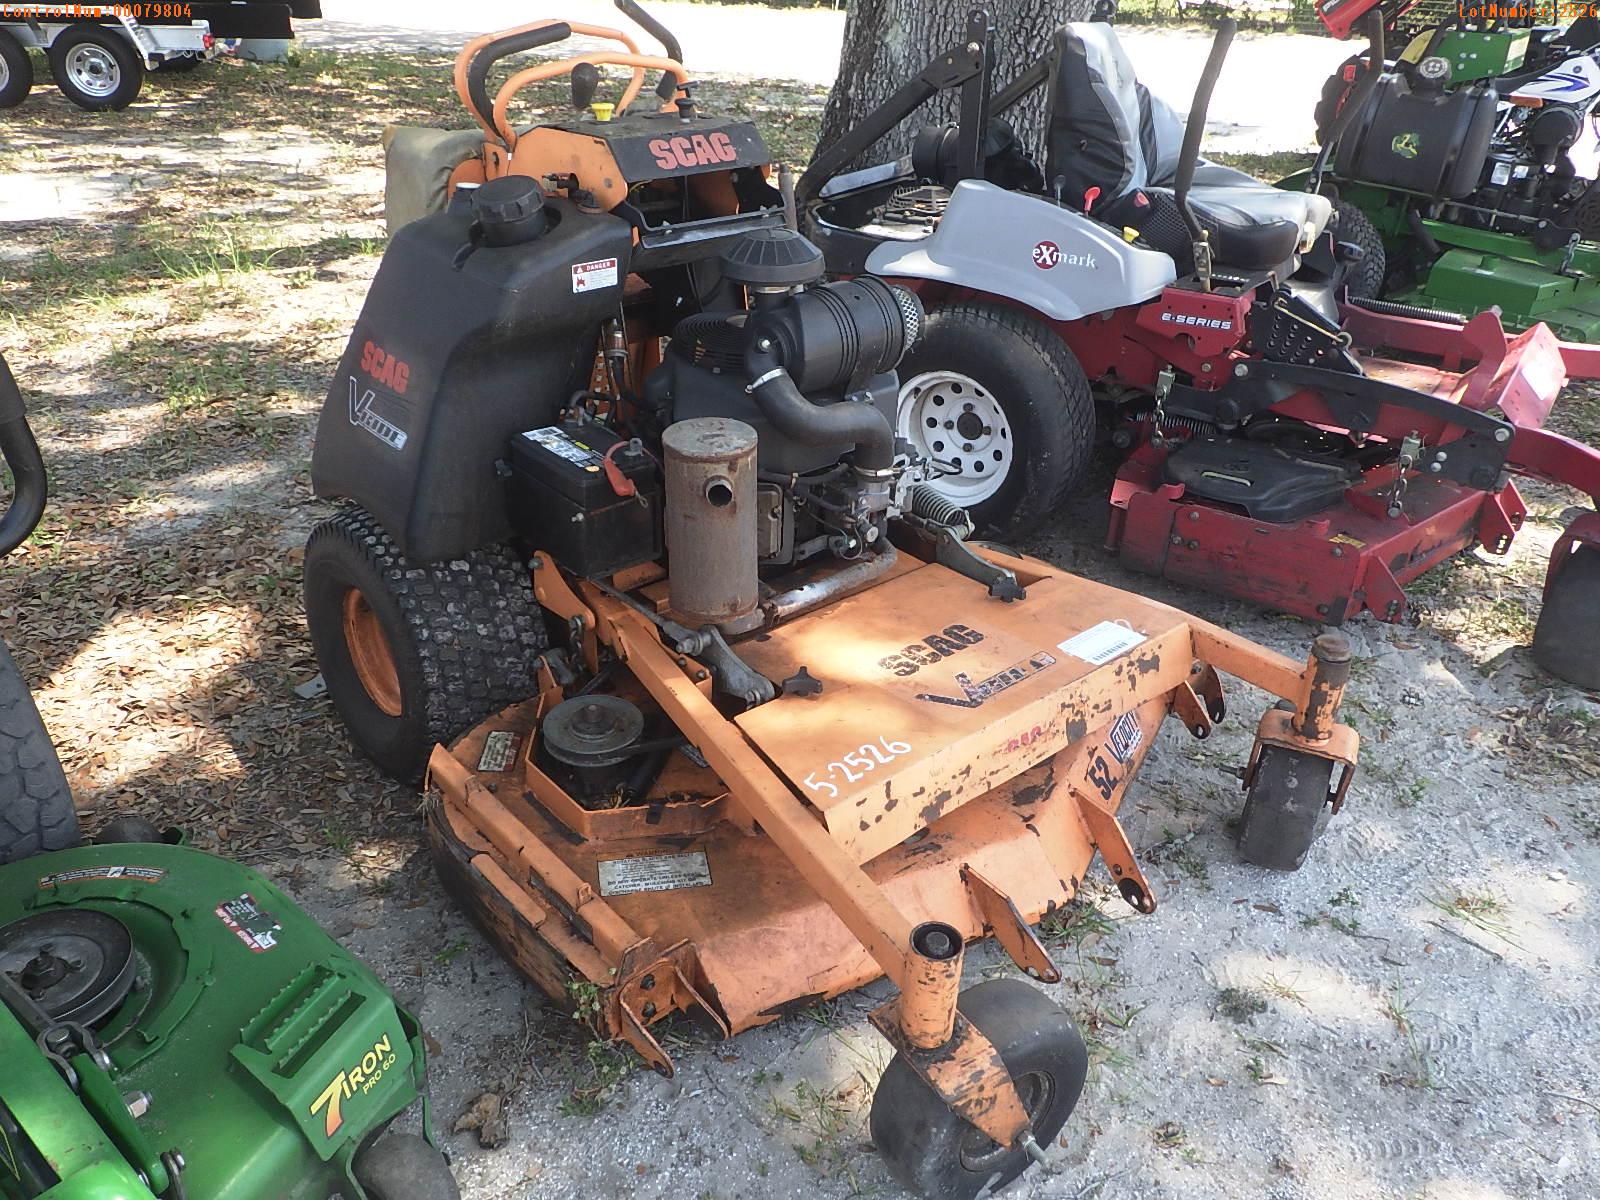 5-02526 (Equip.-Mower)  Seller:Private/Dealer SCAG VELOCITY V-RIDE 52 STAND UP R